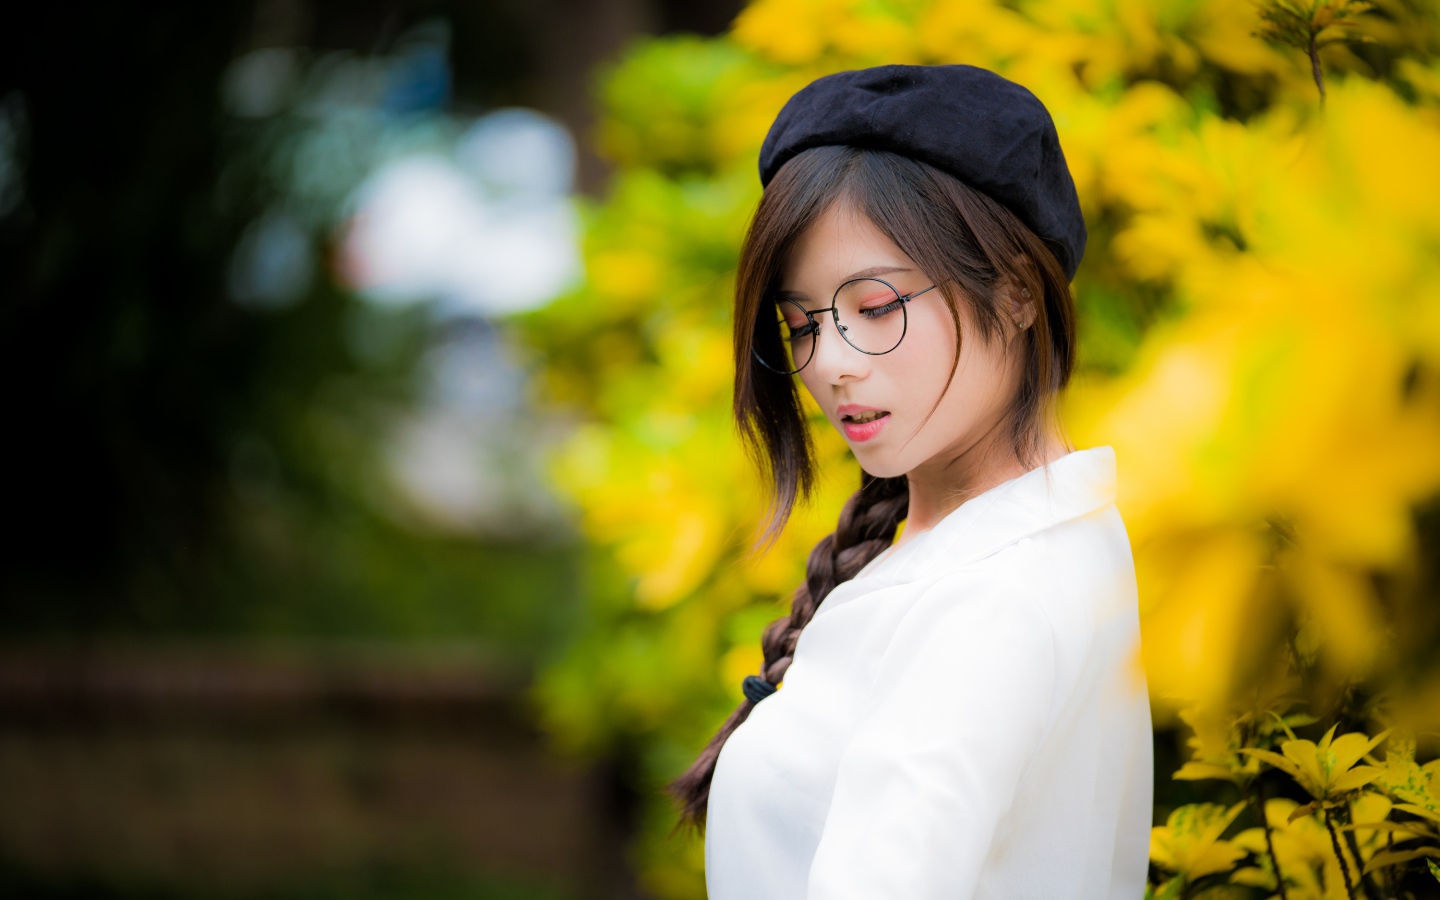 Asian girl with glasses and a black beret